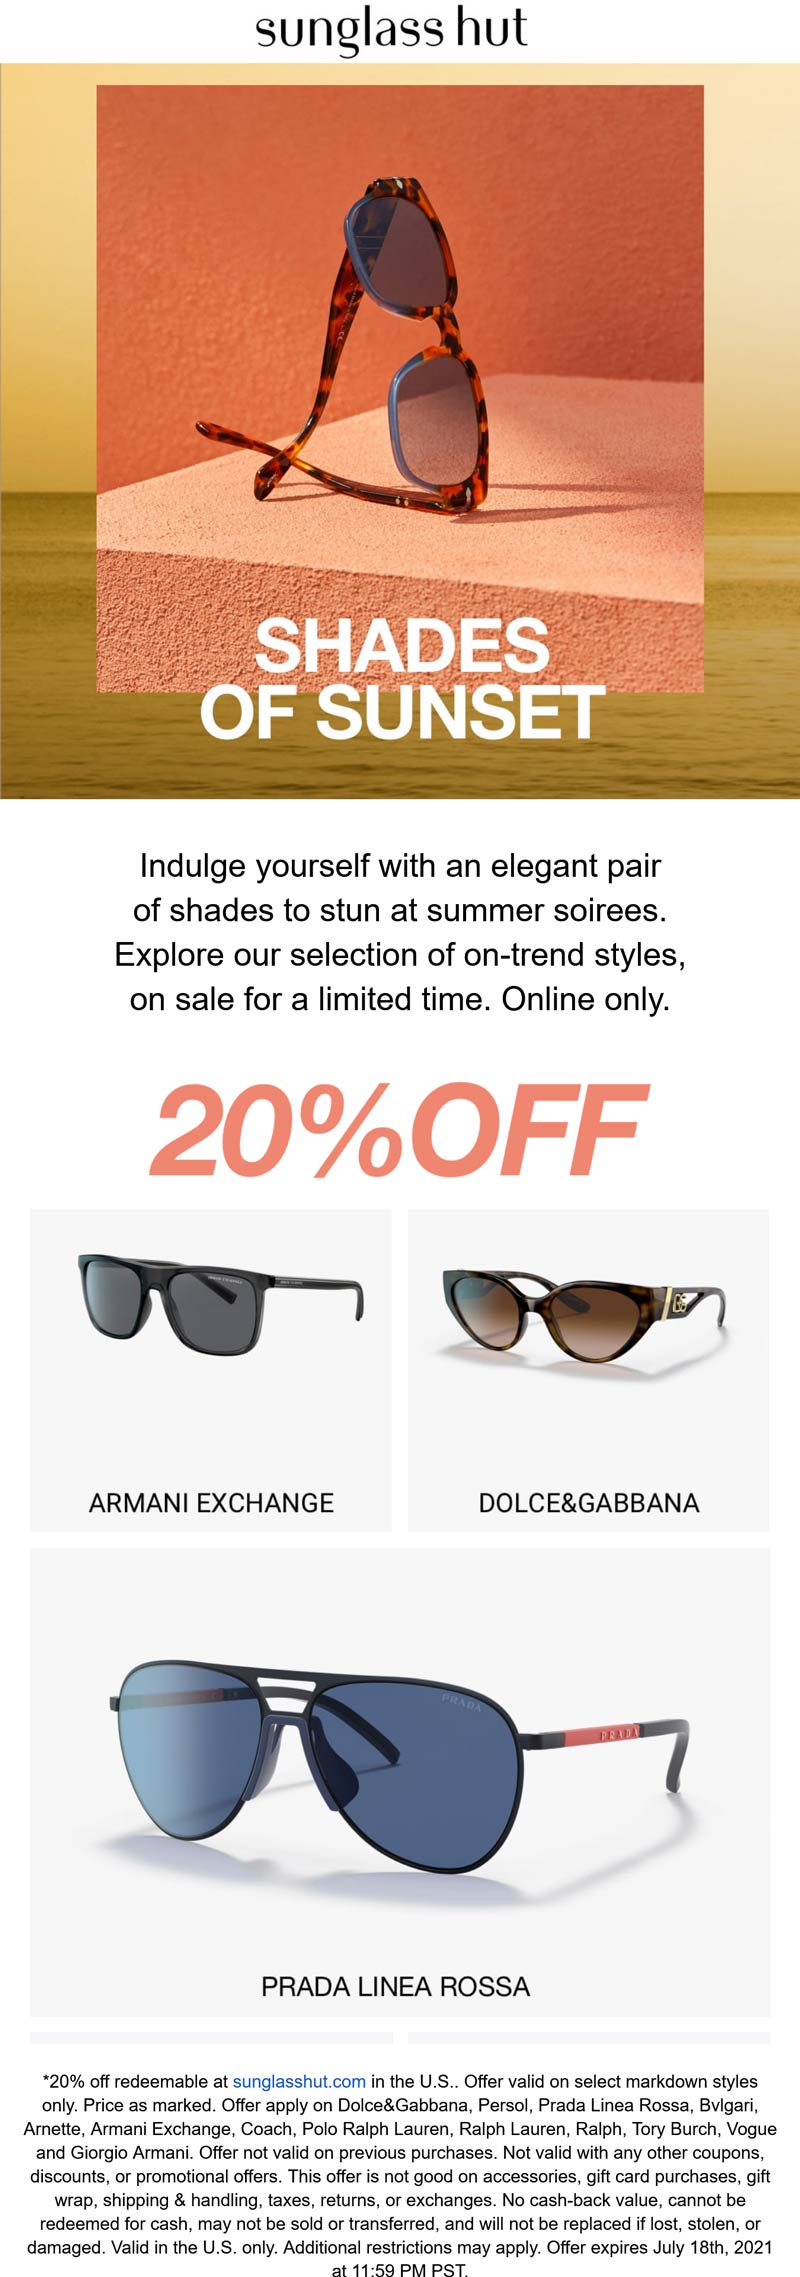 Sunglass Hut stores Coupon  20% off markdowns online at Sunglass Hut #sunglasshut 